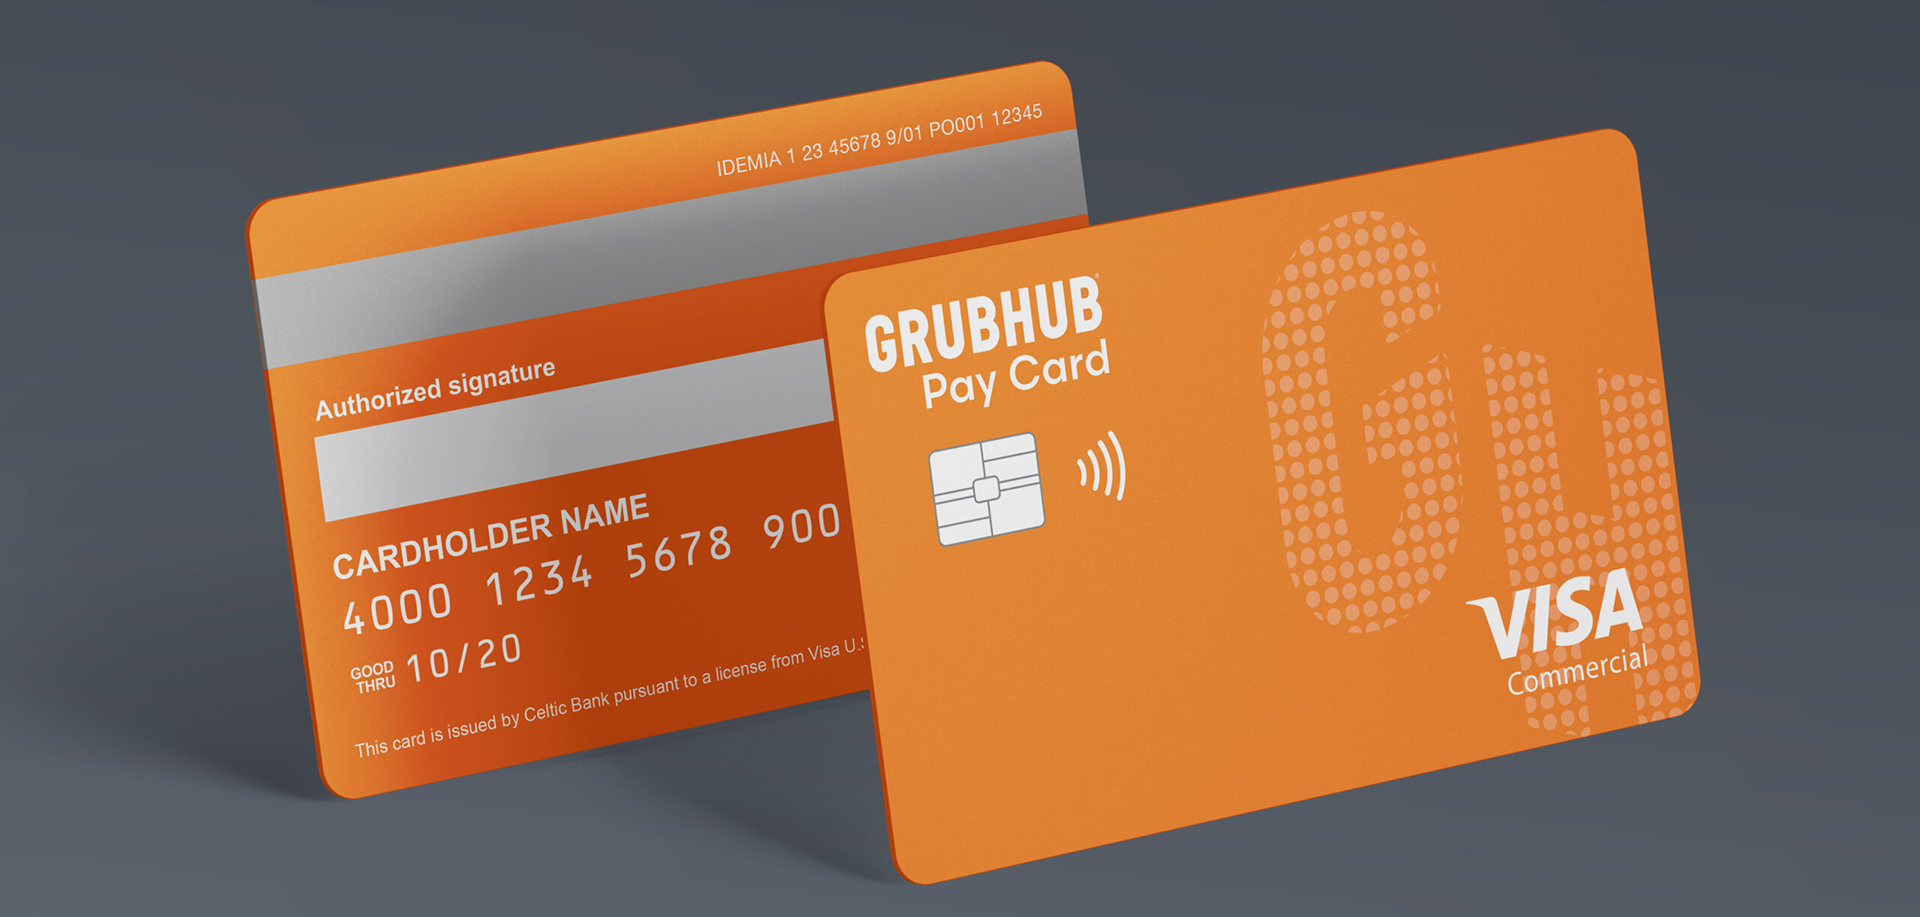 Grubhub Launches Pay Card for Corporate Clients to Enhance ...